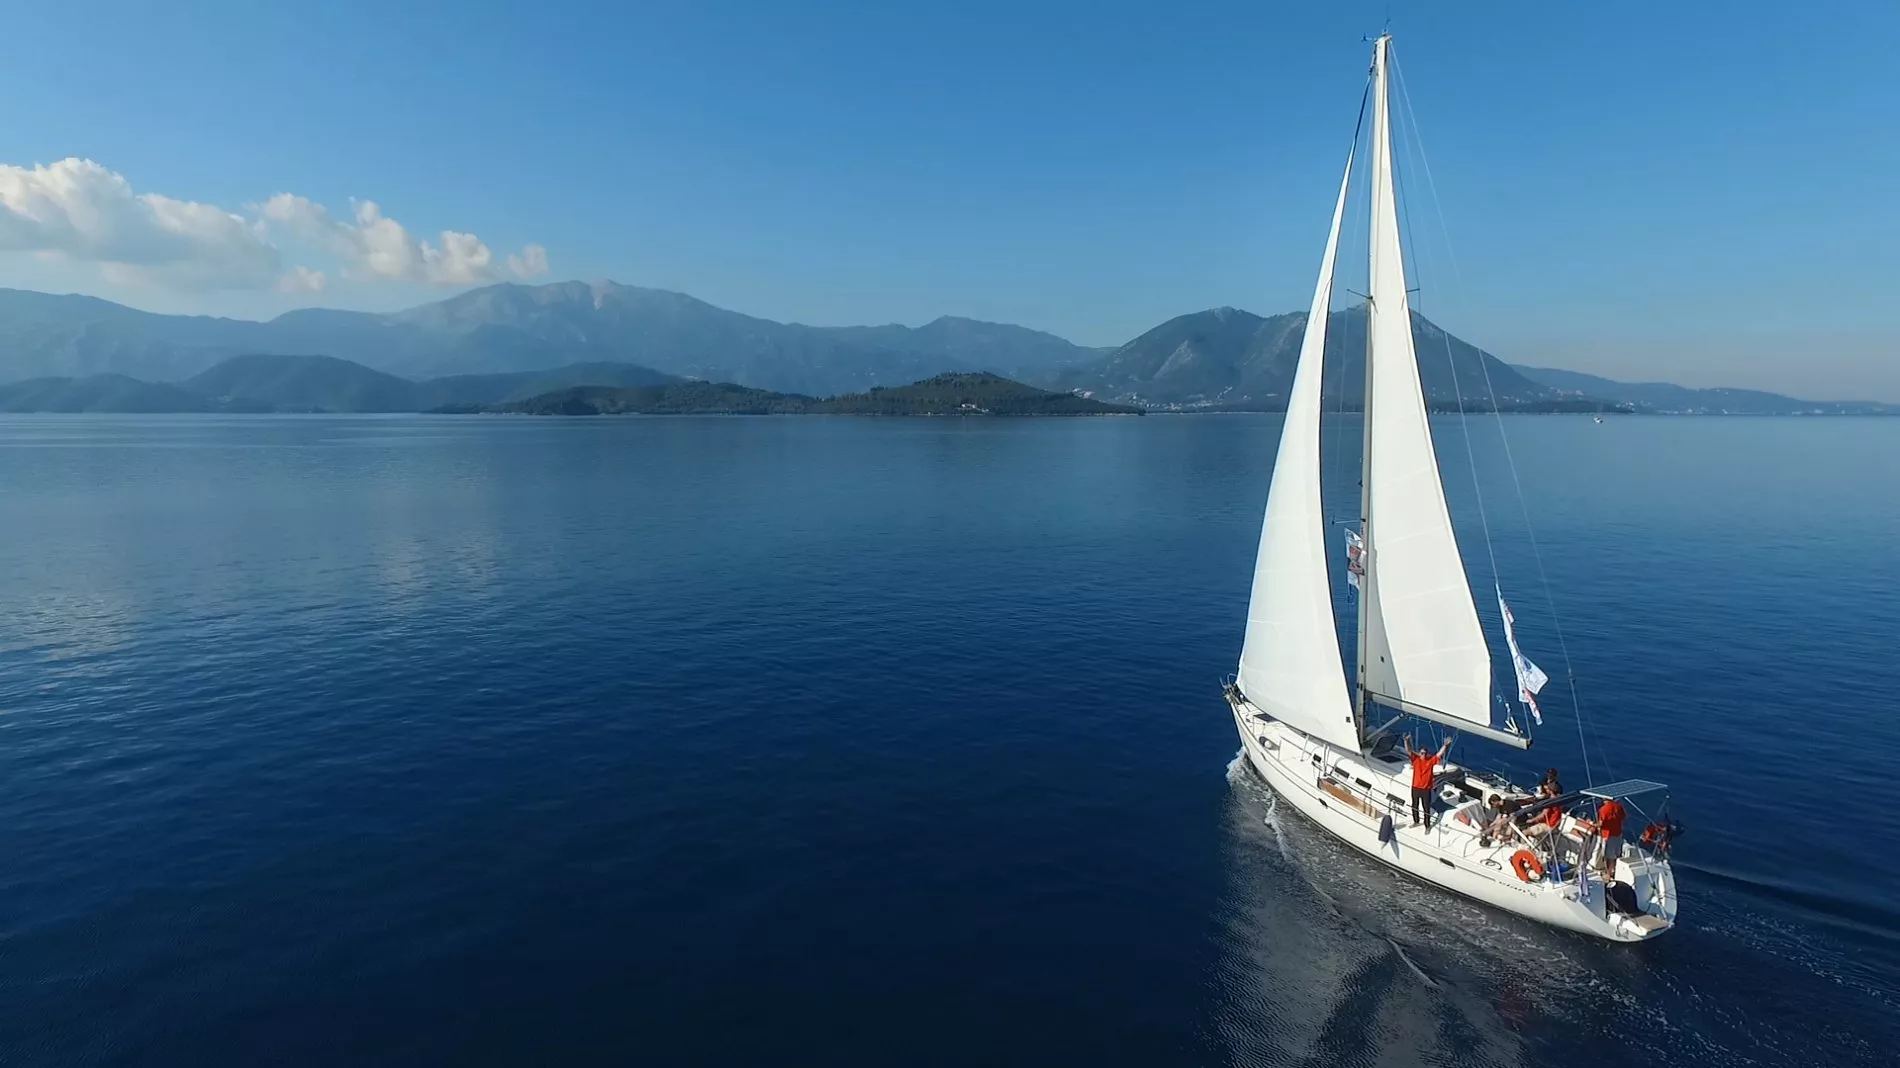 Greek Sails Yacht Charters in Greece, Europe | Yachting - Rated 0.9